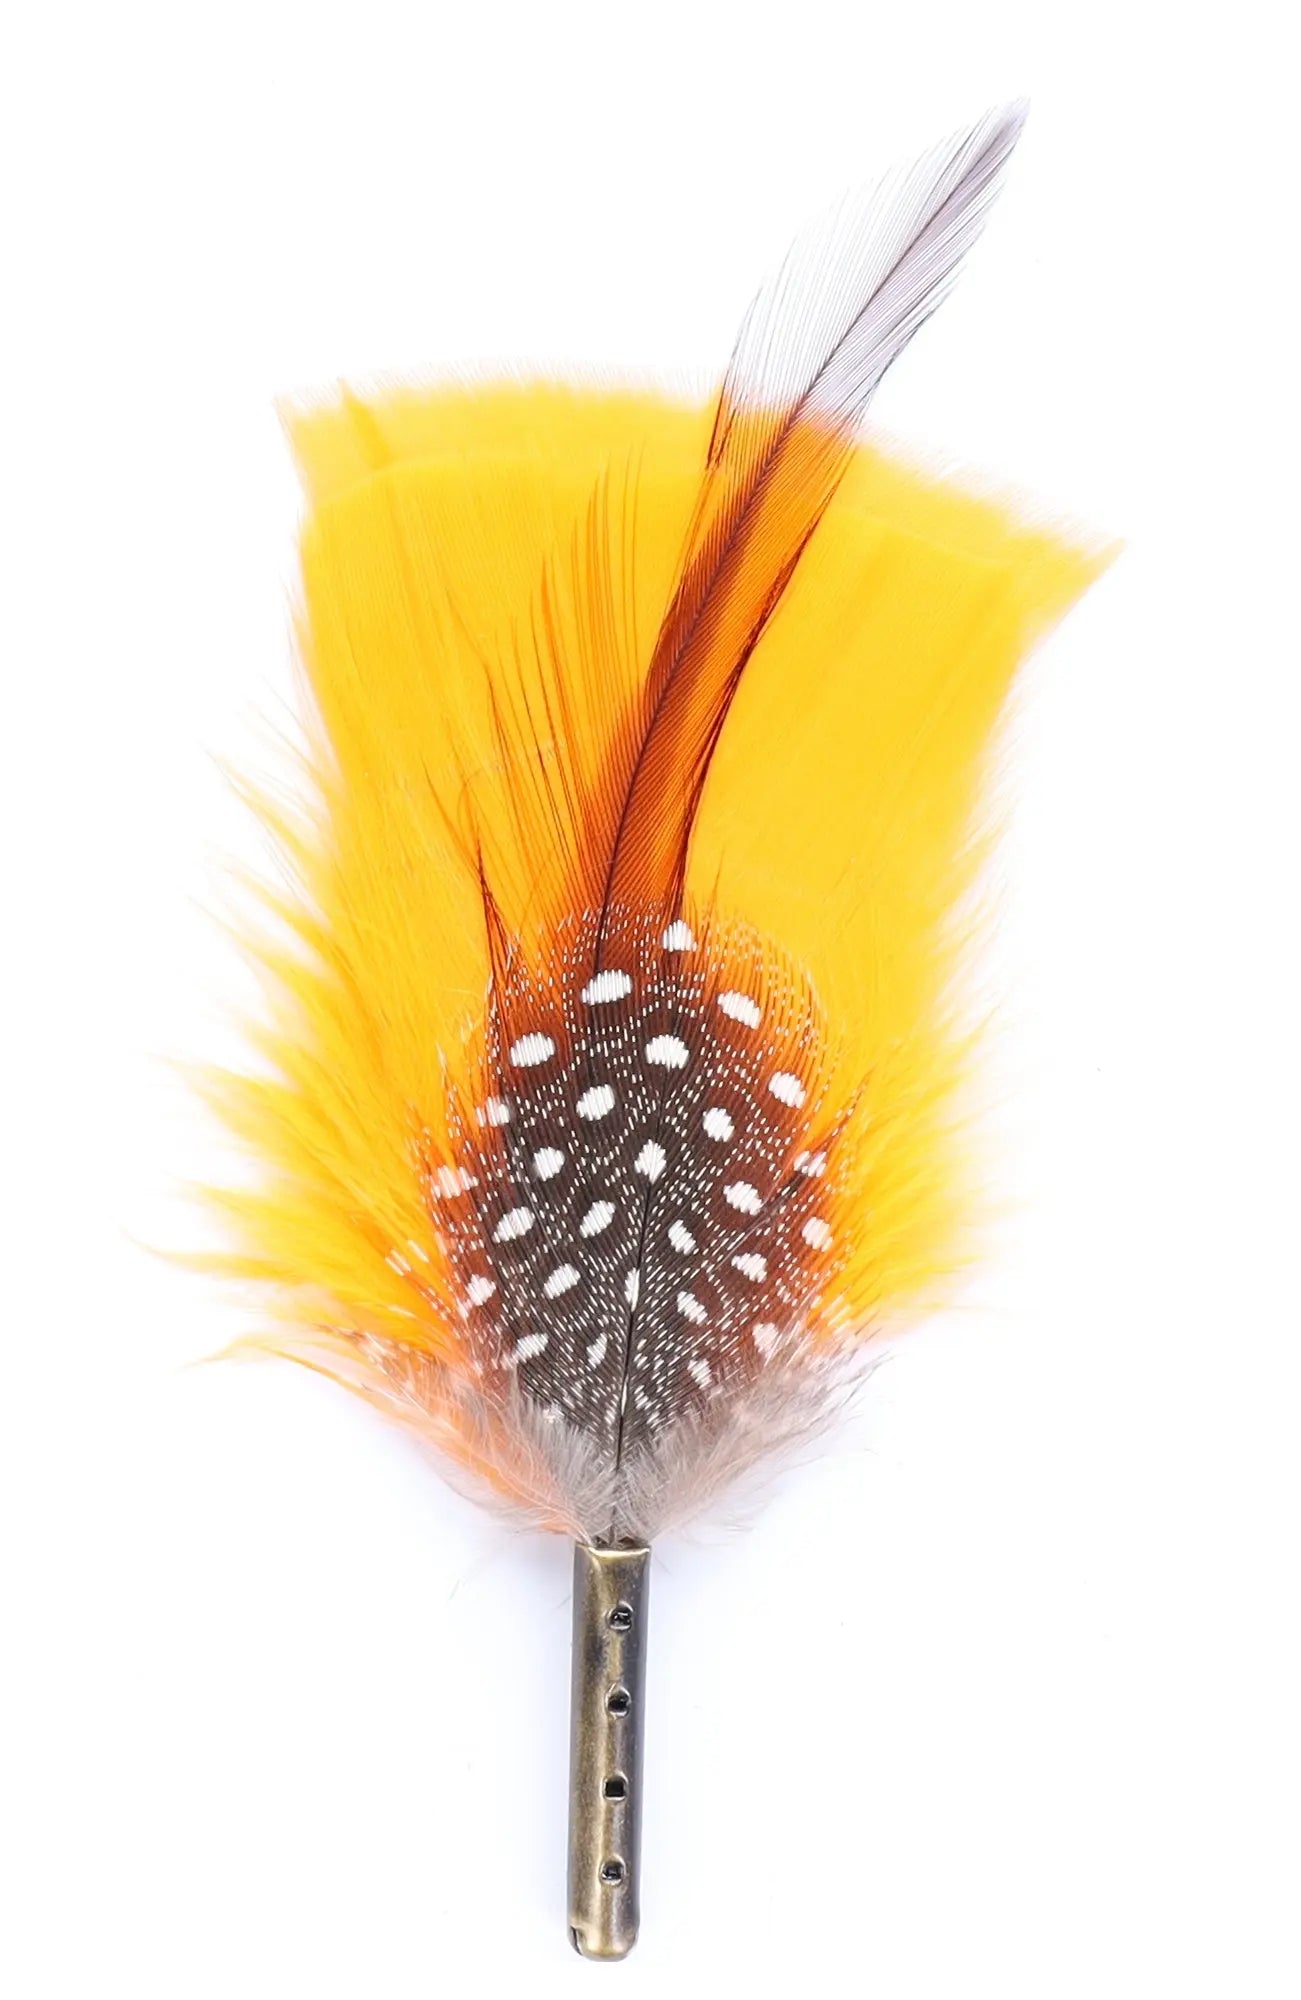 DapperFam Sunset Stroll 4 in Guinea & Poultry Hat Feather Bronze Tip